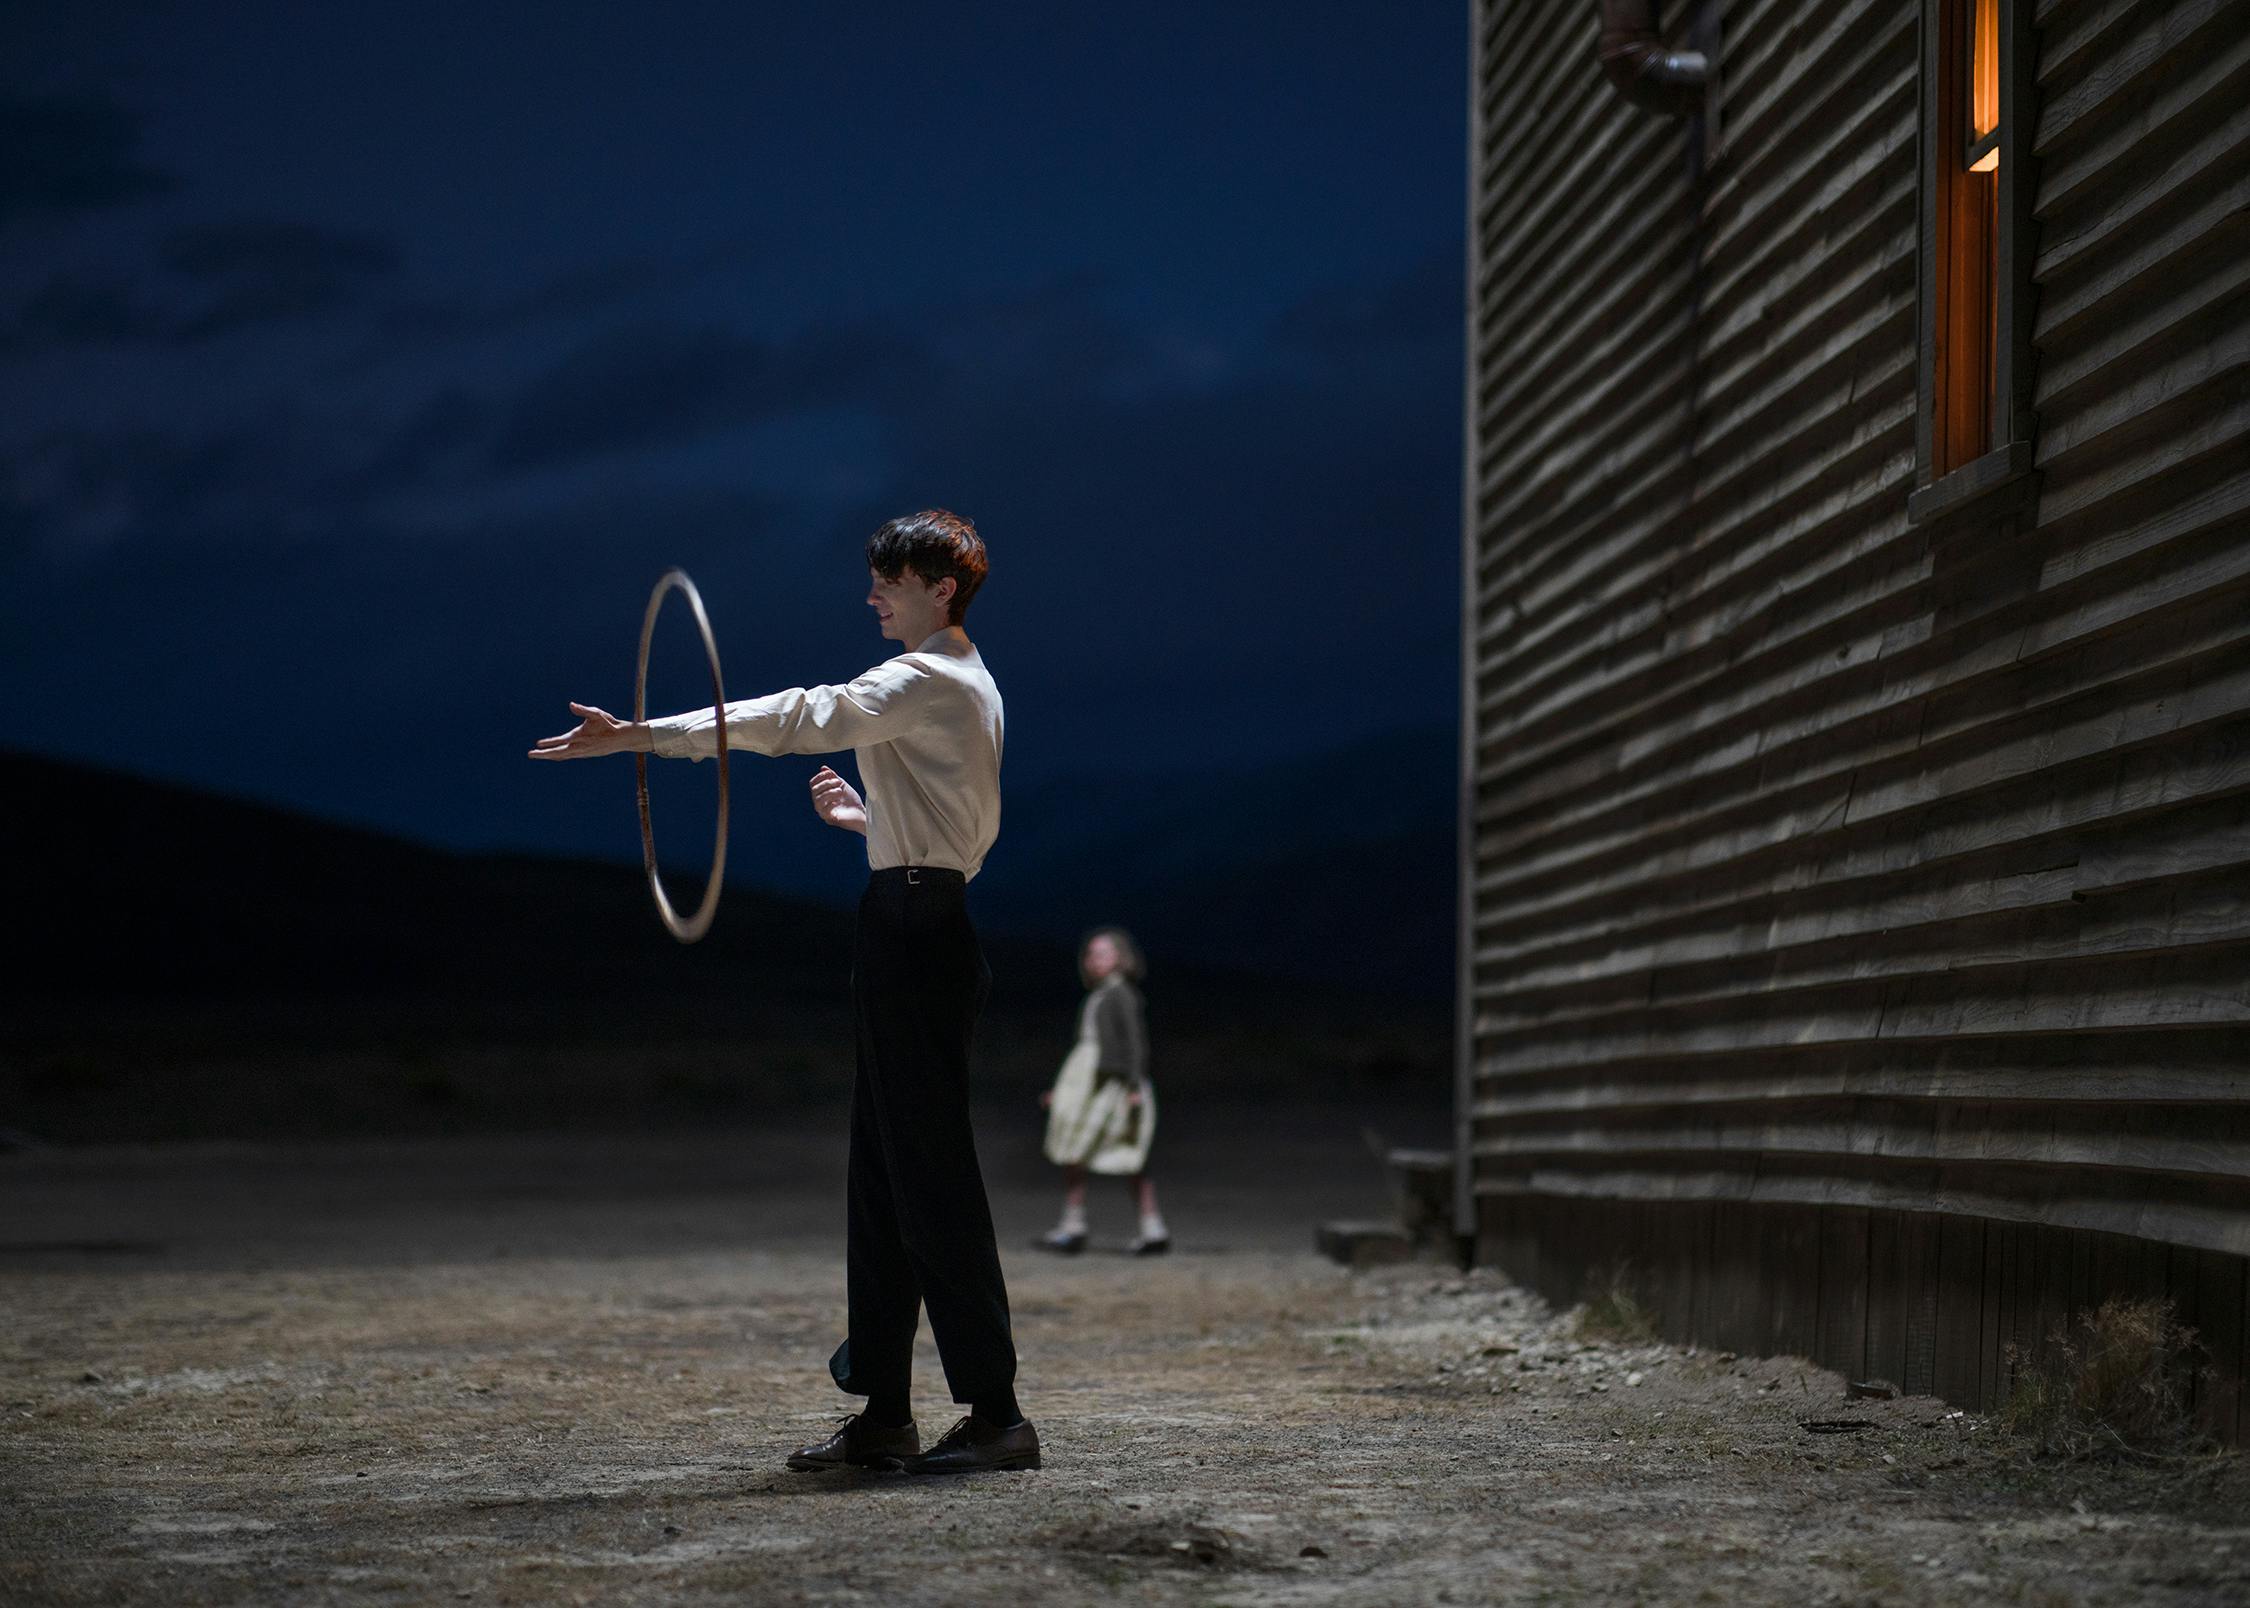 Kodi Smit-McPhee stands outside in the dark, wearing black pants and a white shirt. He balances a hula hoop on his arm, as a woman walks by him in the distance.